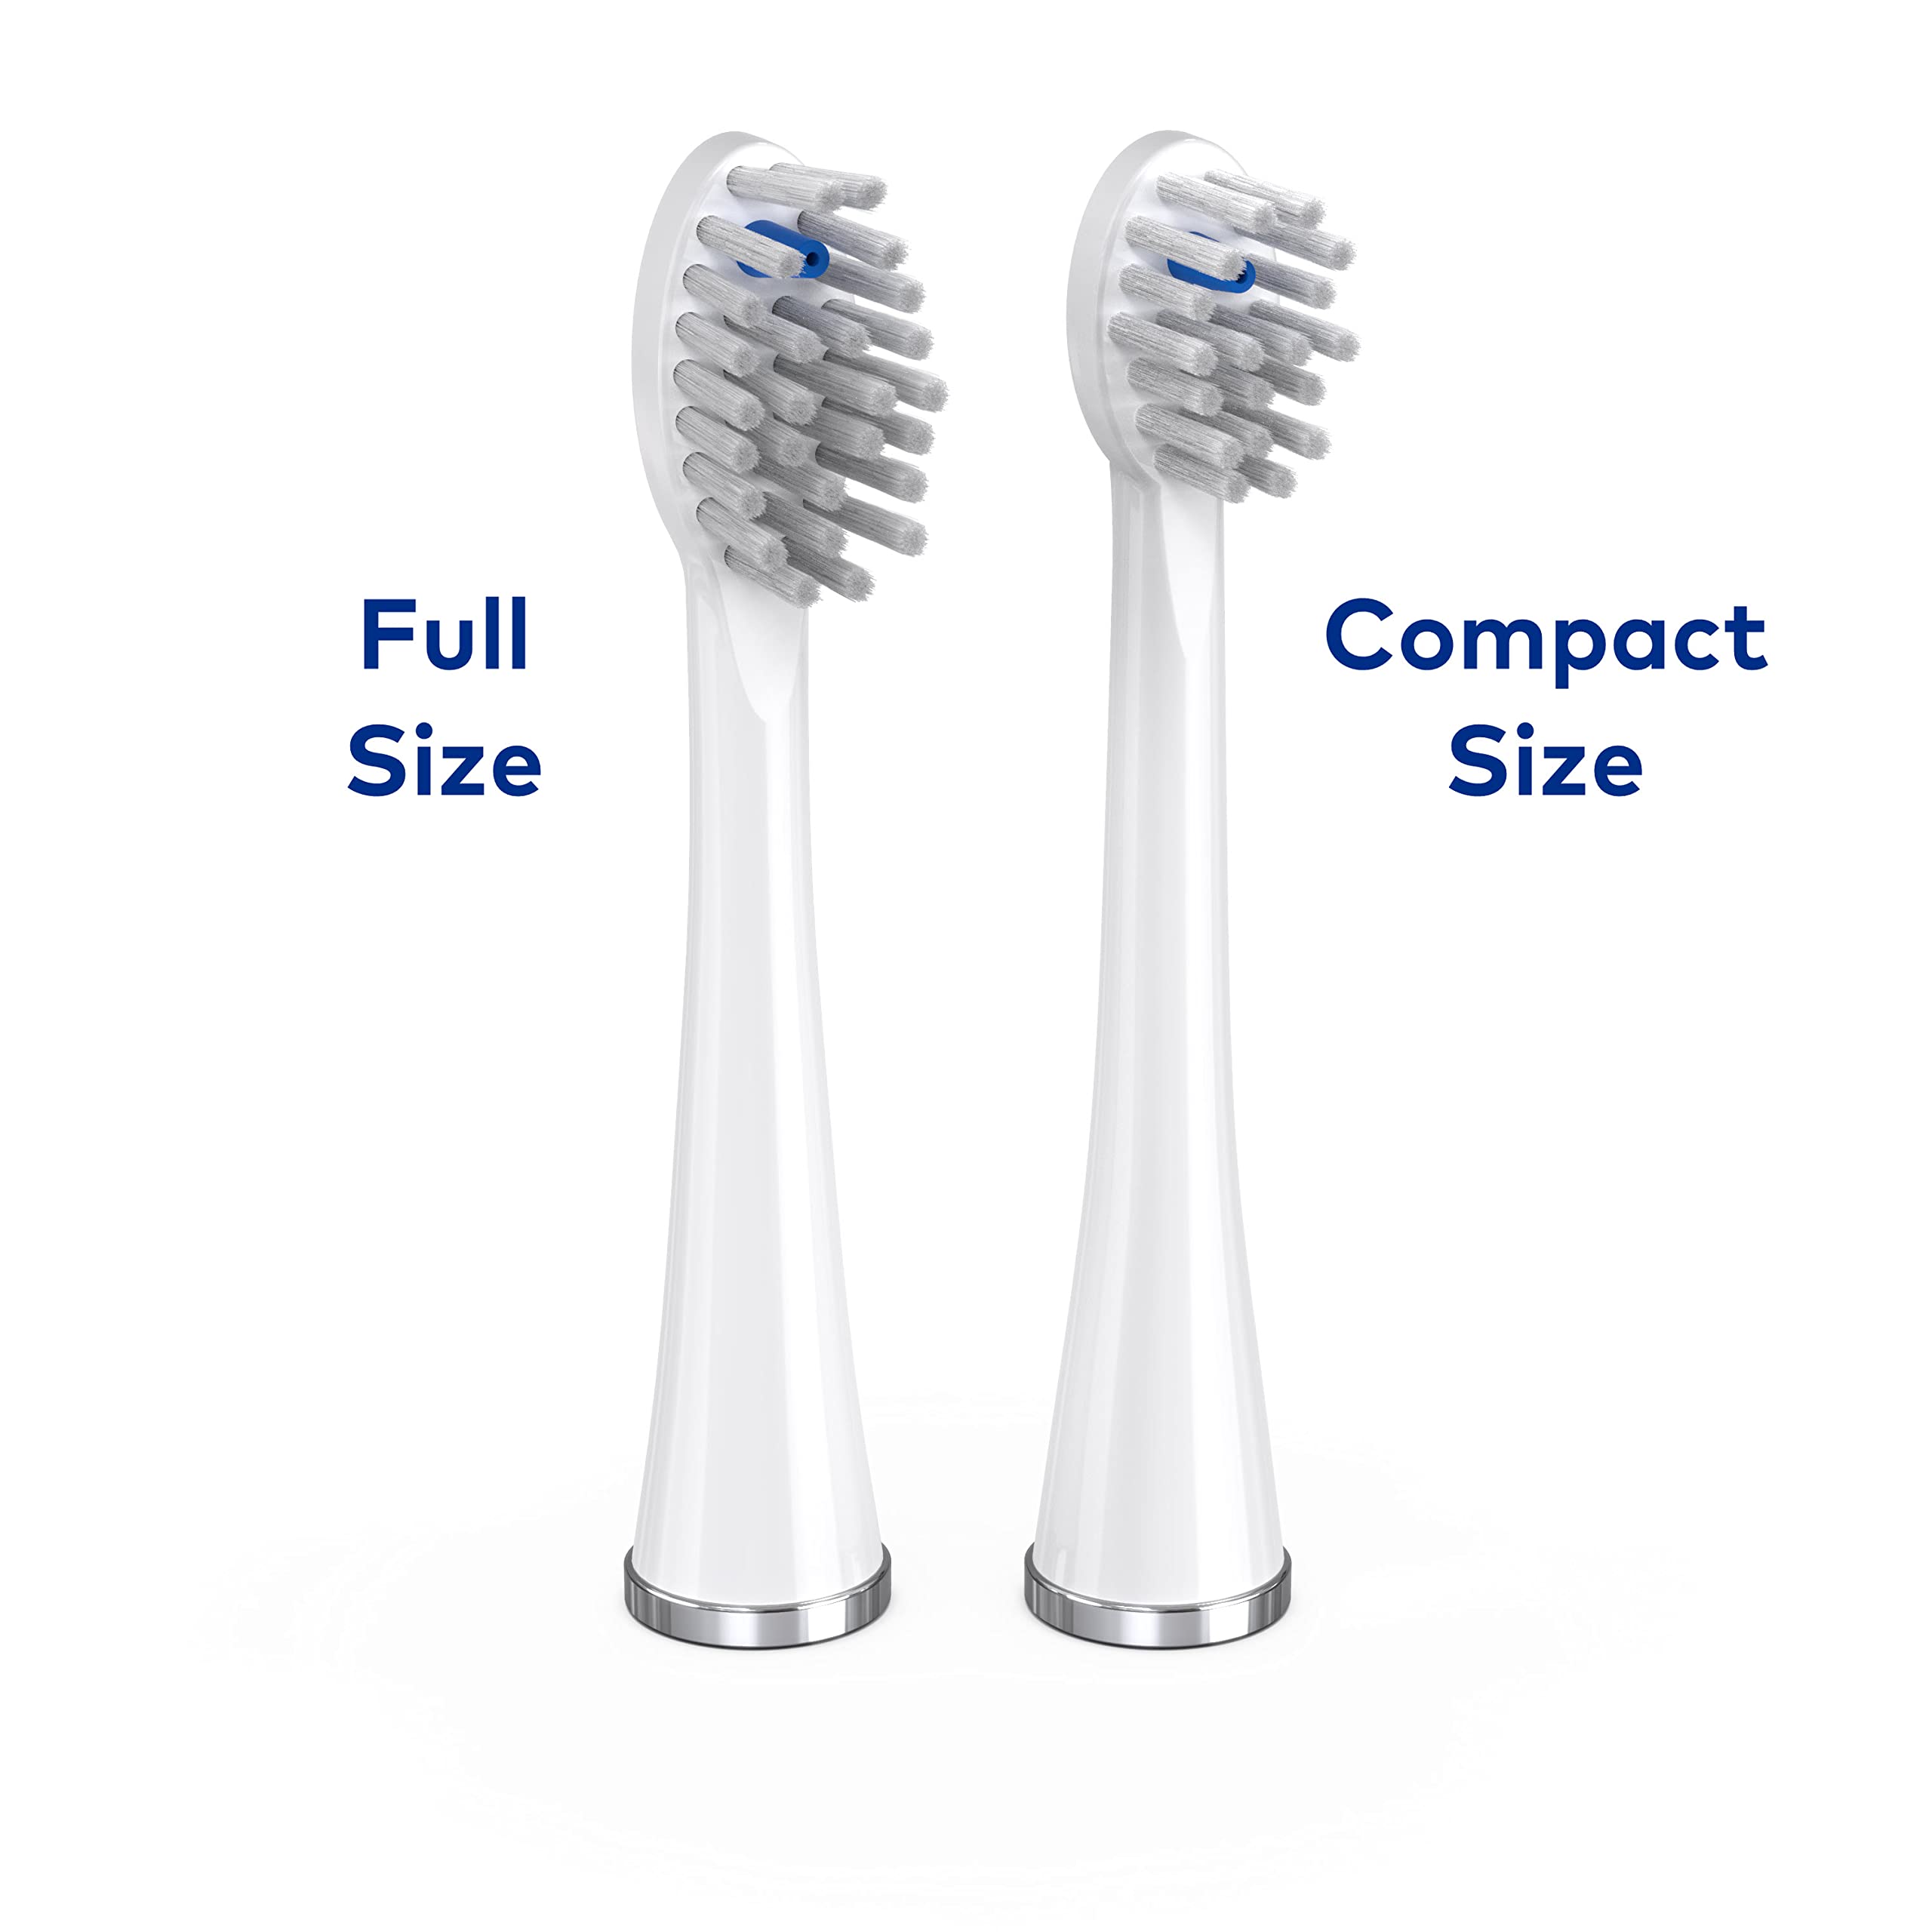 Waterpik Compact Replacement Brush Heads With Covers for Sonic-Fusion Flossing Toothbrush SFRB-2EW, 2 Count White